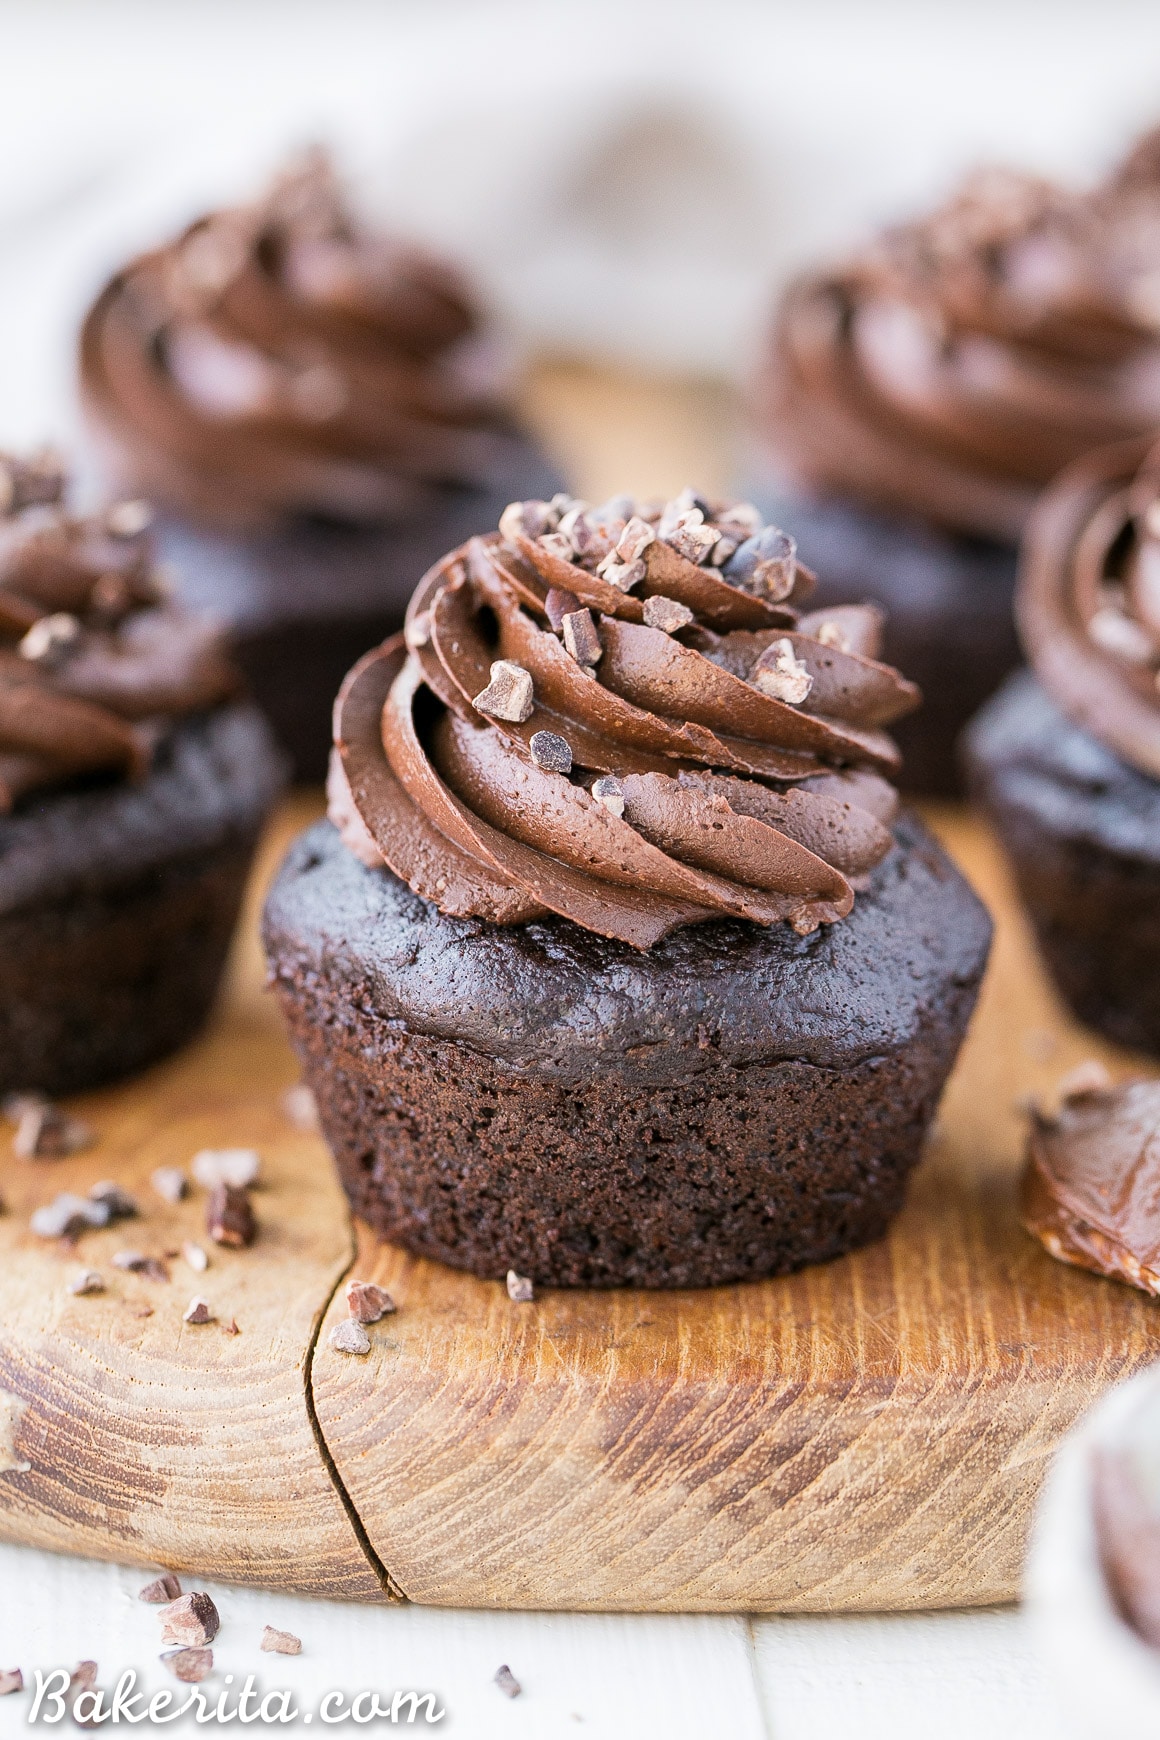 These Paleo Chocolate Zucchini Cupcakes are topped with a rich and fudgy Paleo Chocolate Frosting! You'd never guess there are veggies packed into these super moist and chocolatey gluten-free cupcakes.